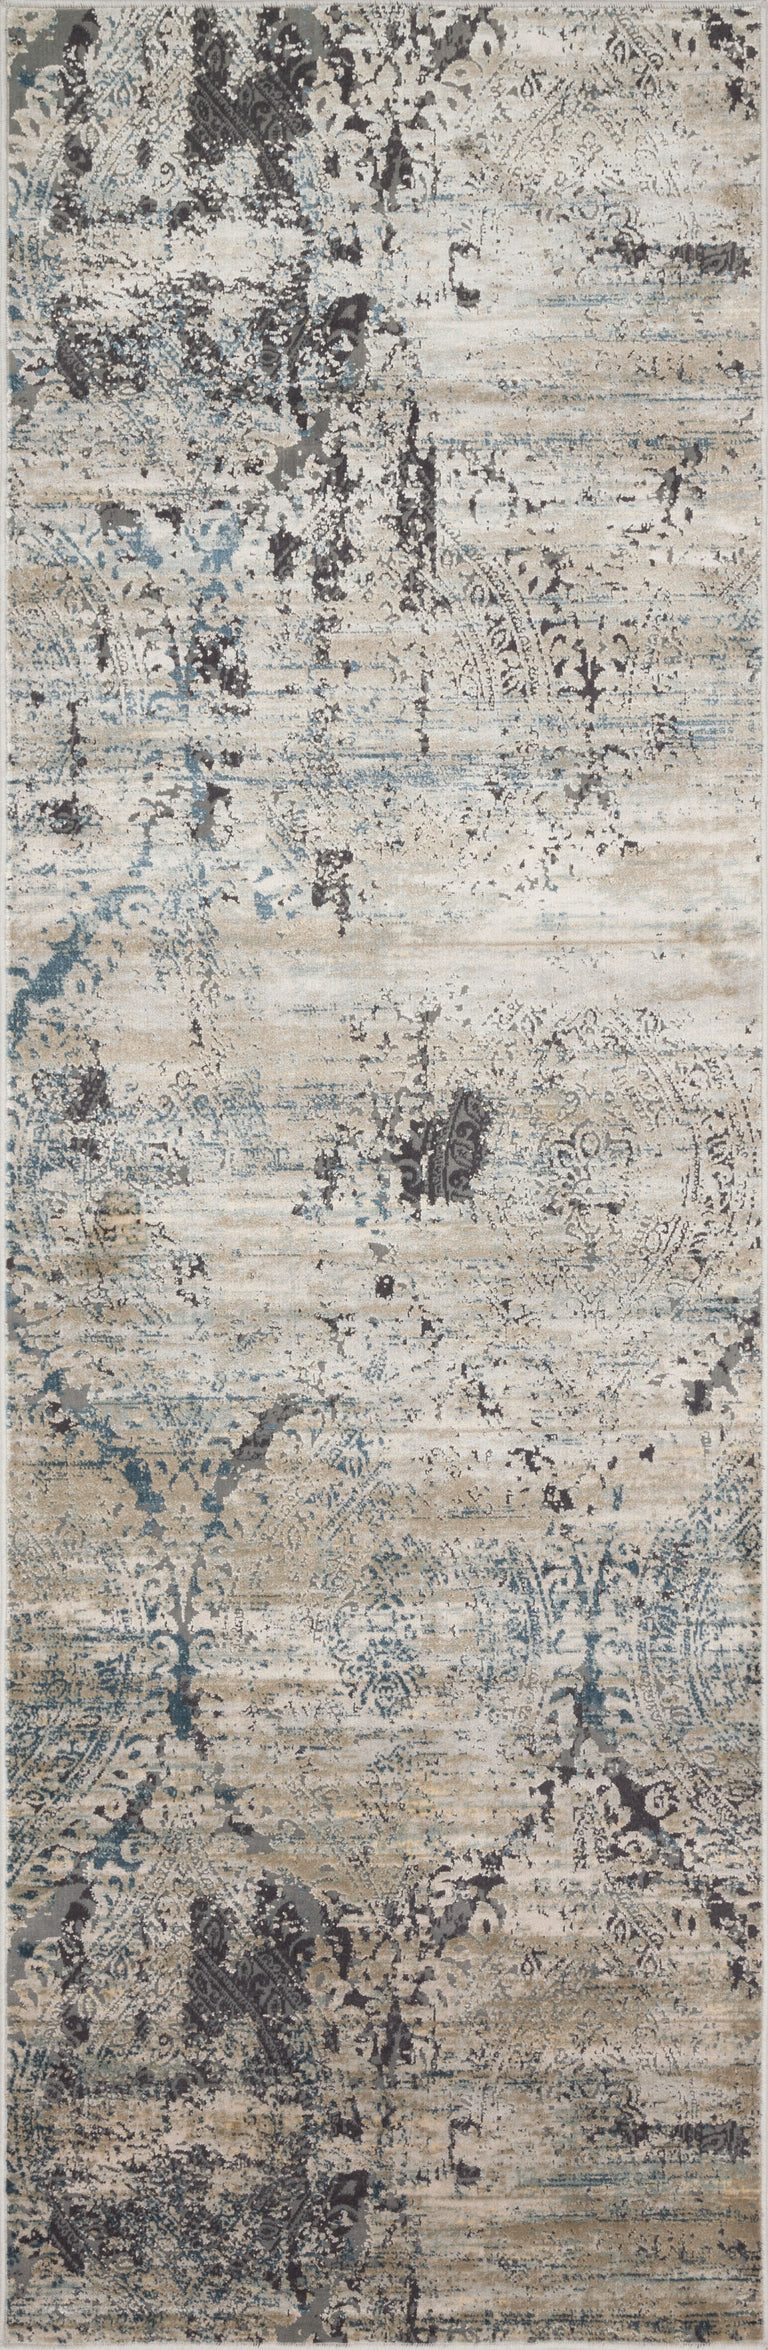 Loloi Rugs Cascade Collection Rug in Taupe, Blue - 7'10" x 10'10"